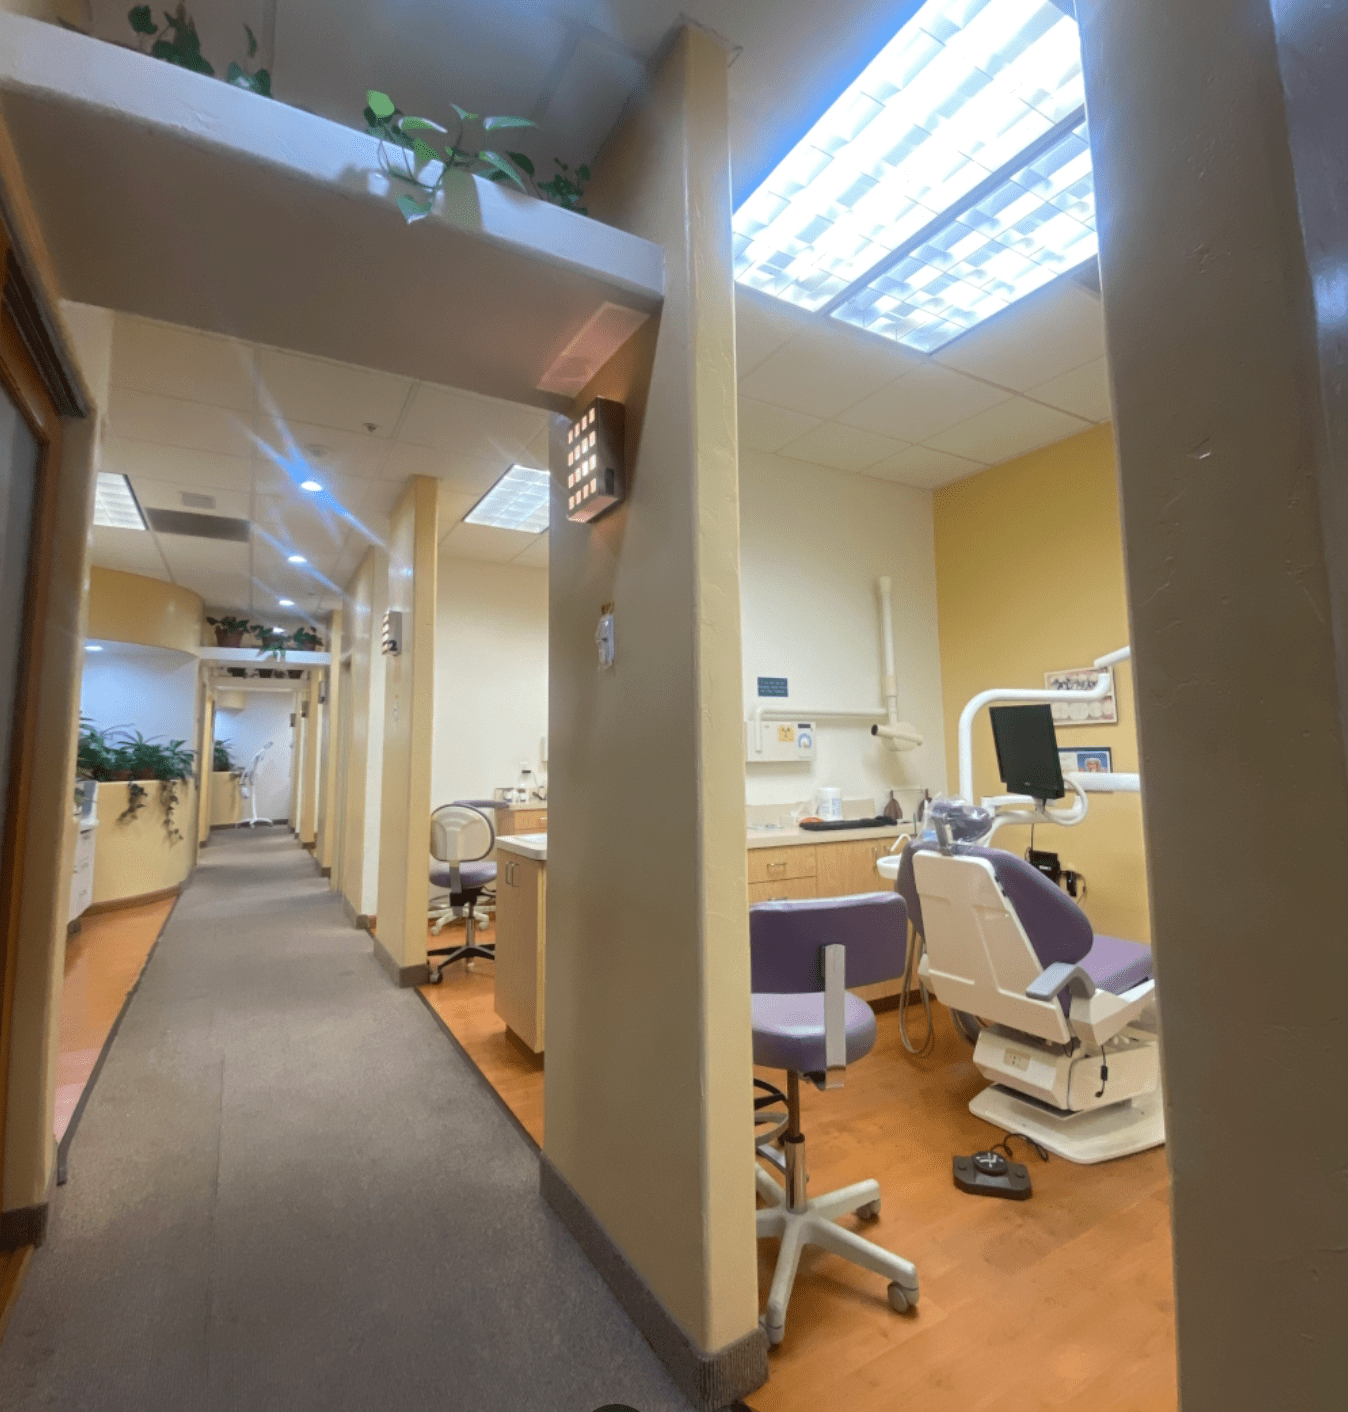 Kurt DDS Emergency Dentistry in Downey, CA Establishes a Presence with New Dental Office